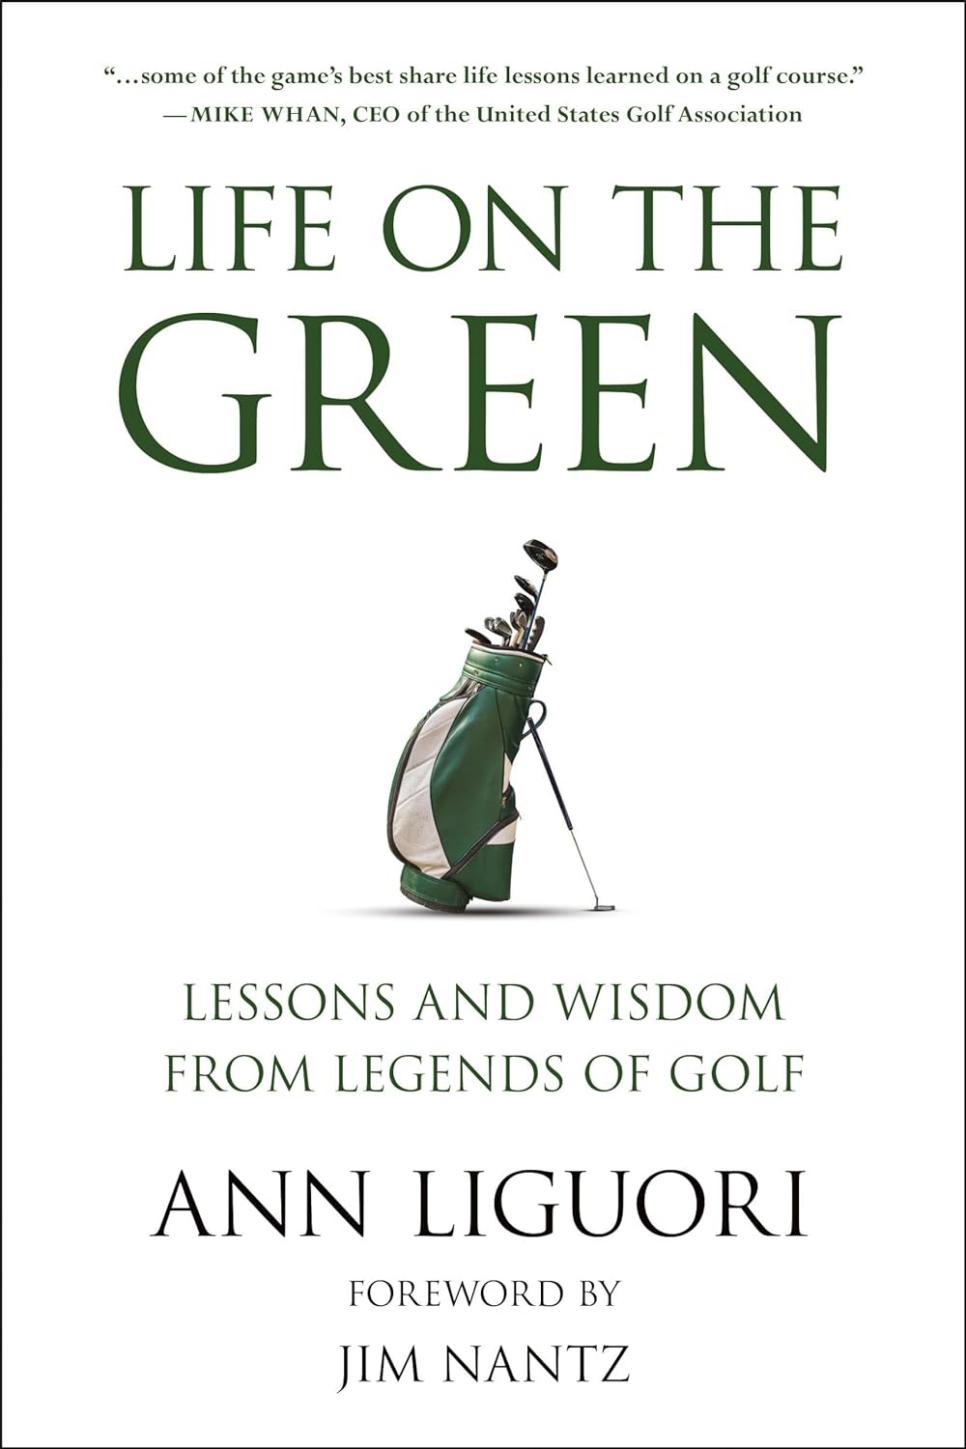 rx-amazonlife-on-the-green-lessons-and-wisdom-from-legends-of-golf-by-ann-liguori.jpeg